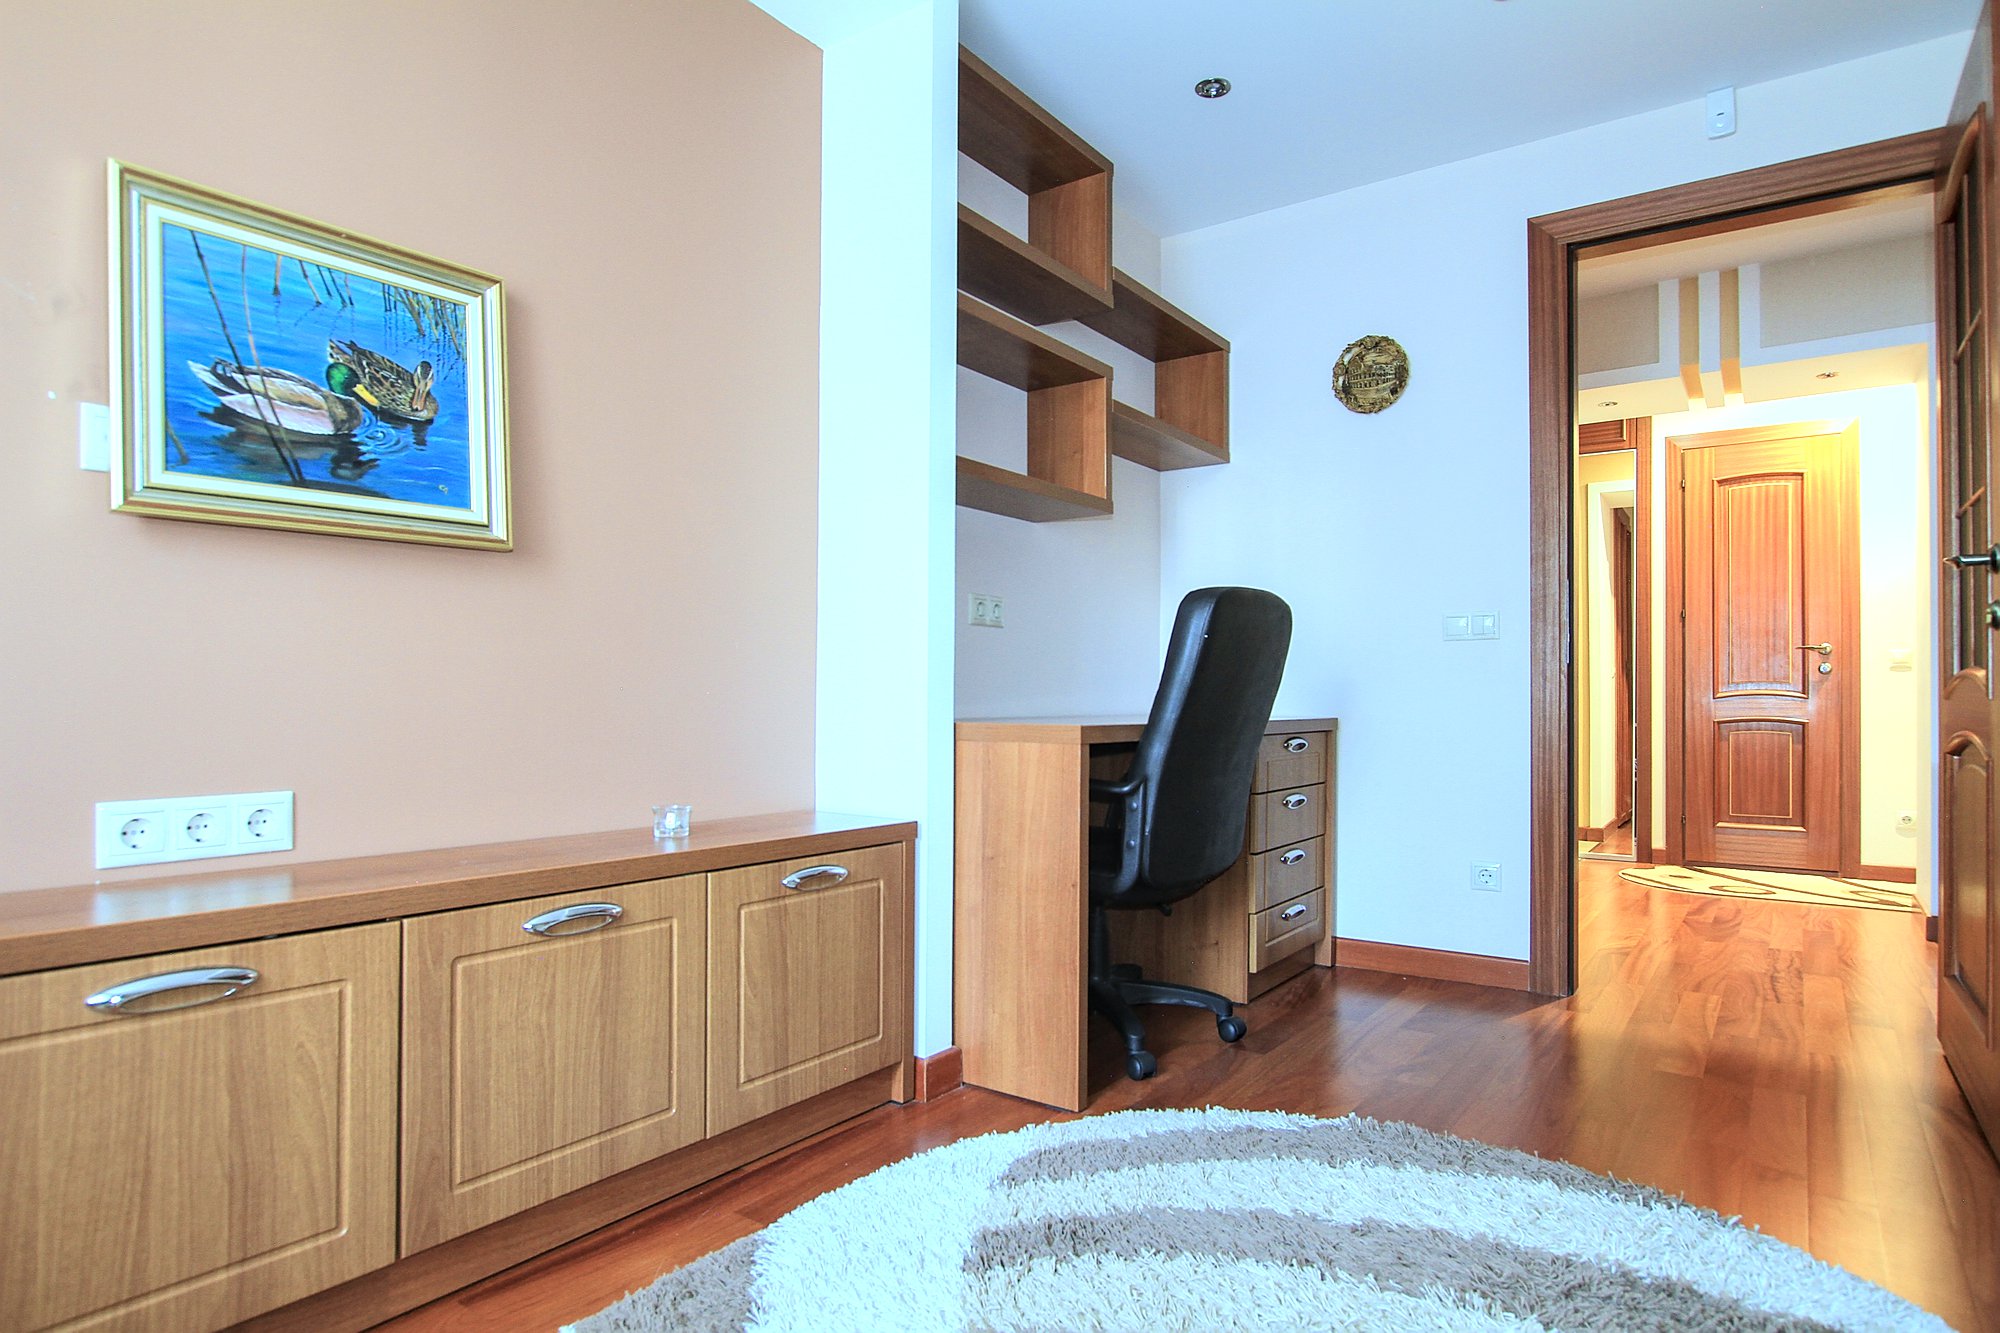 Botanica Family Apartment is a 3 rooms apartment for rent in Chisinau, Moldova